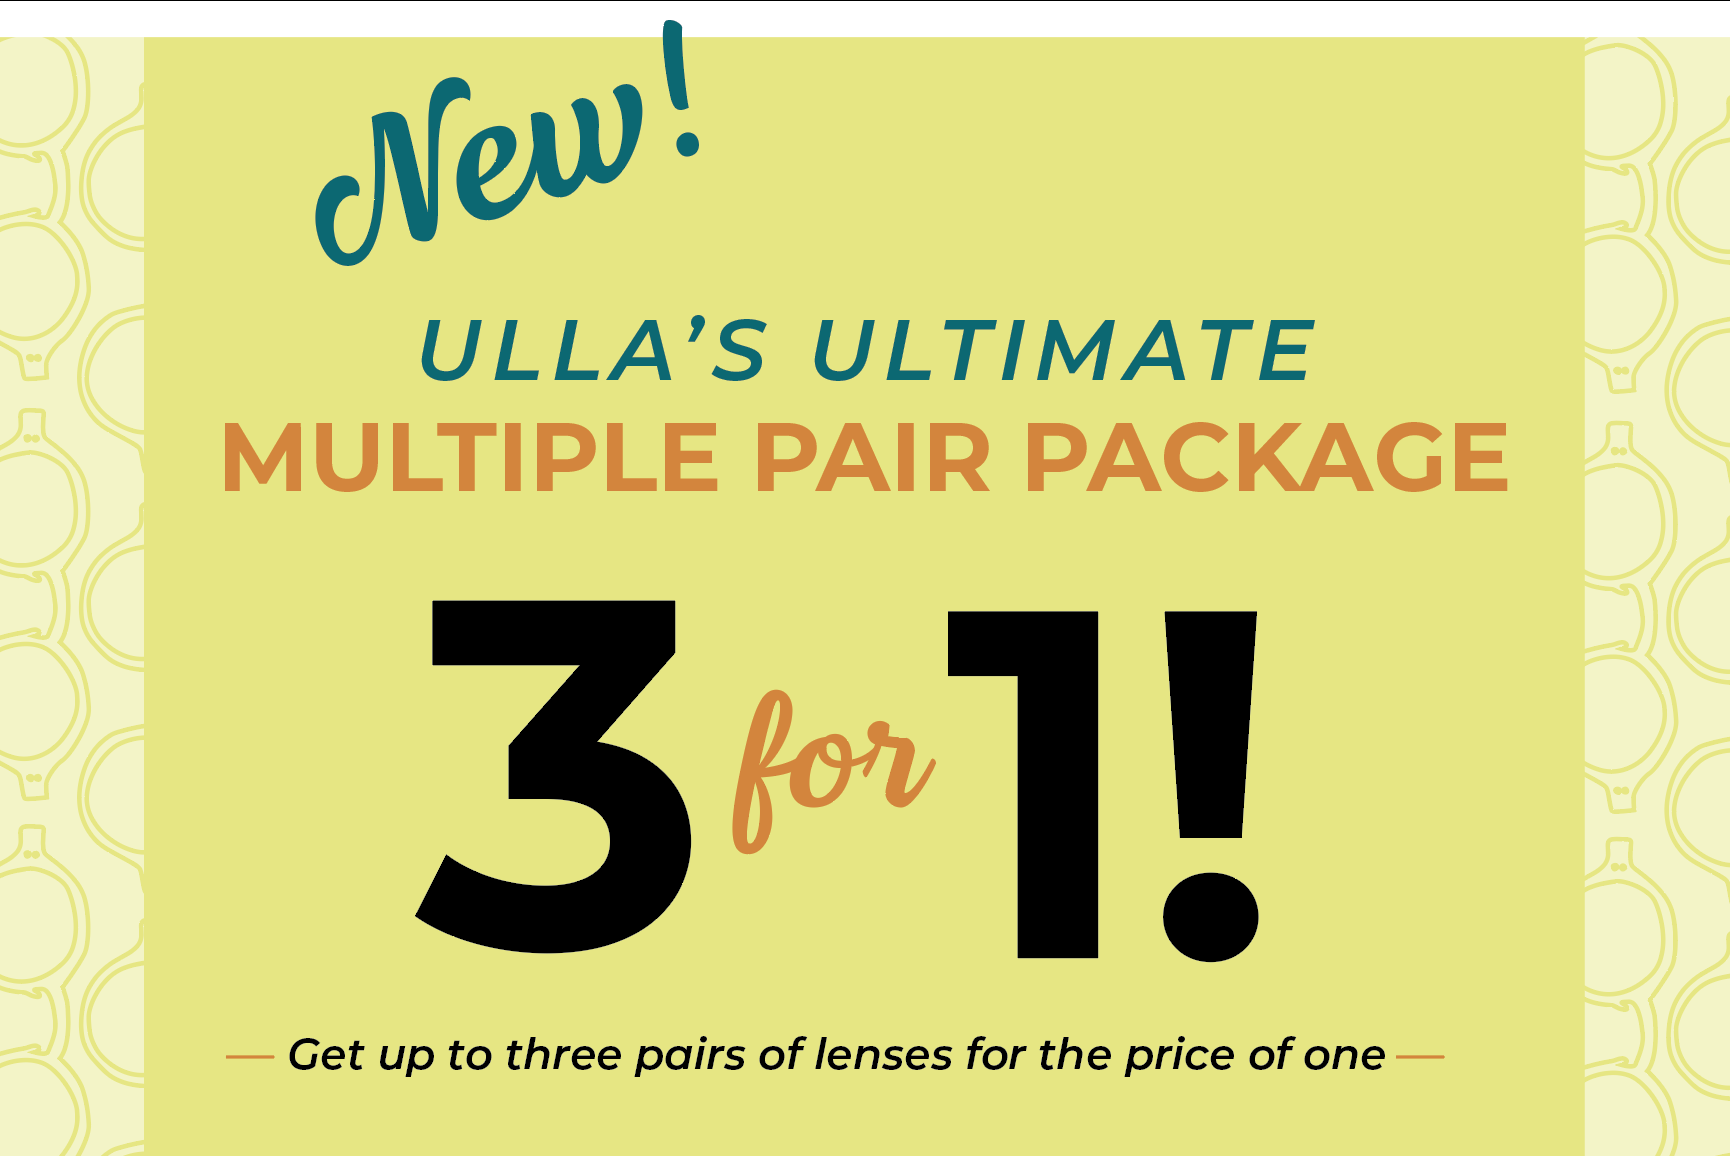 Ulla's Ultimate Multiple Pair Package. Get up to three pairs of lenses for the price of one